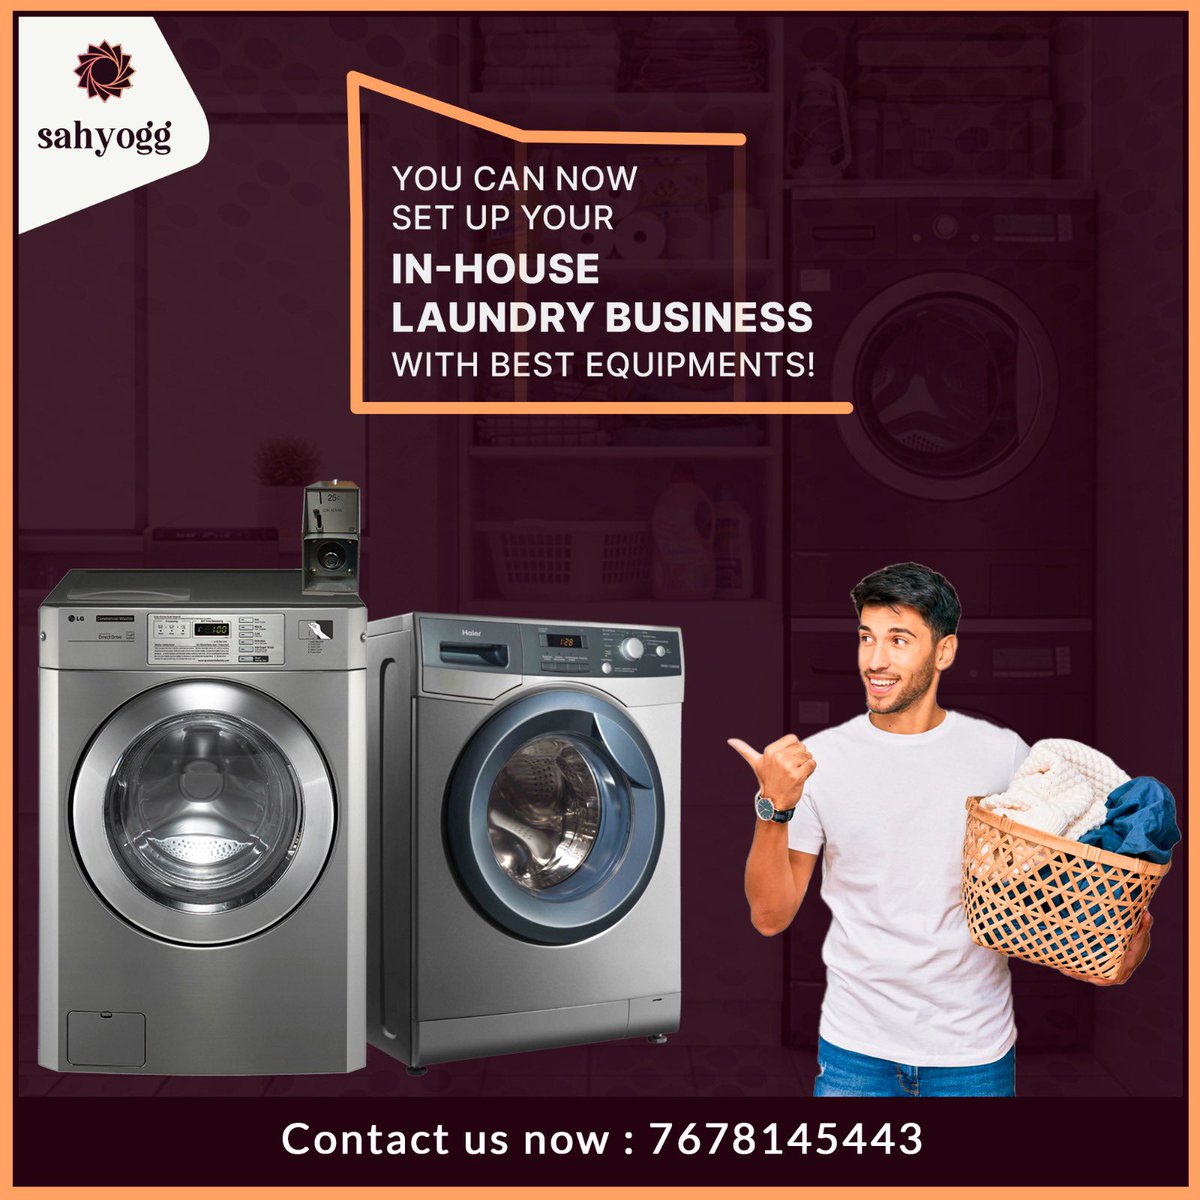 We will help you to set up your own laundry business brand with high-end equipments and technology.
For more details kindly contact us on 7678145443

#sahyogg #laundrybusiness #setup #laundryequipments #yourguide #laundryconsultant